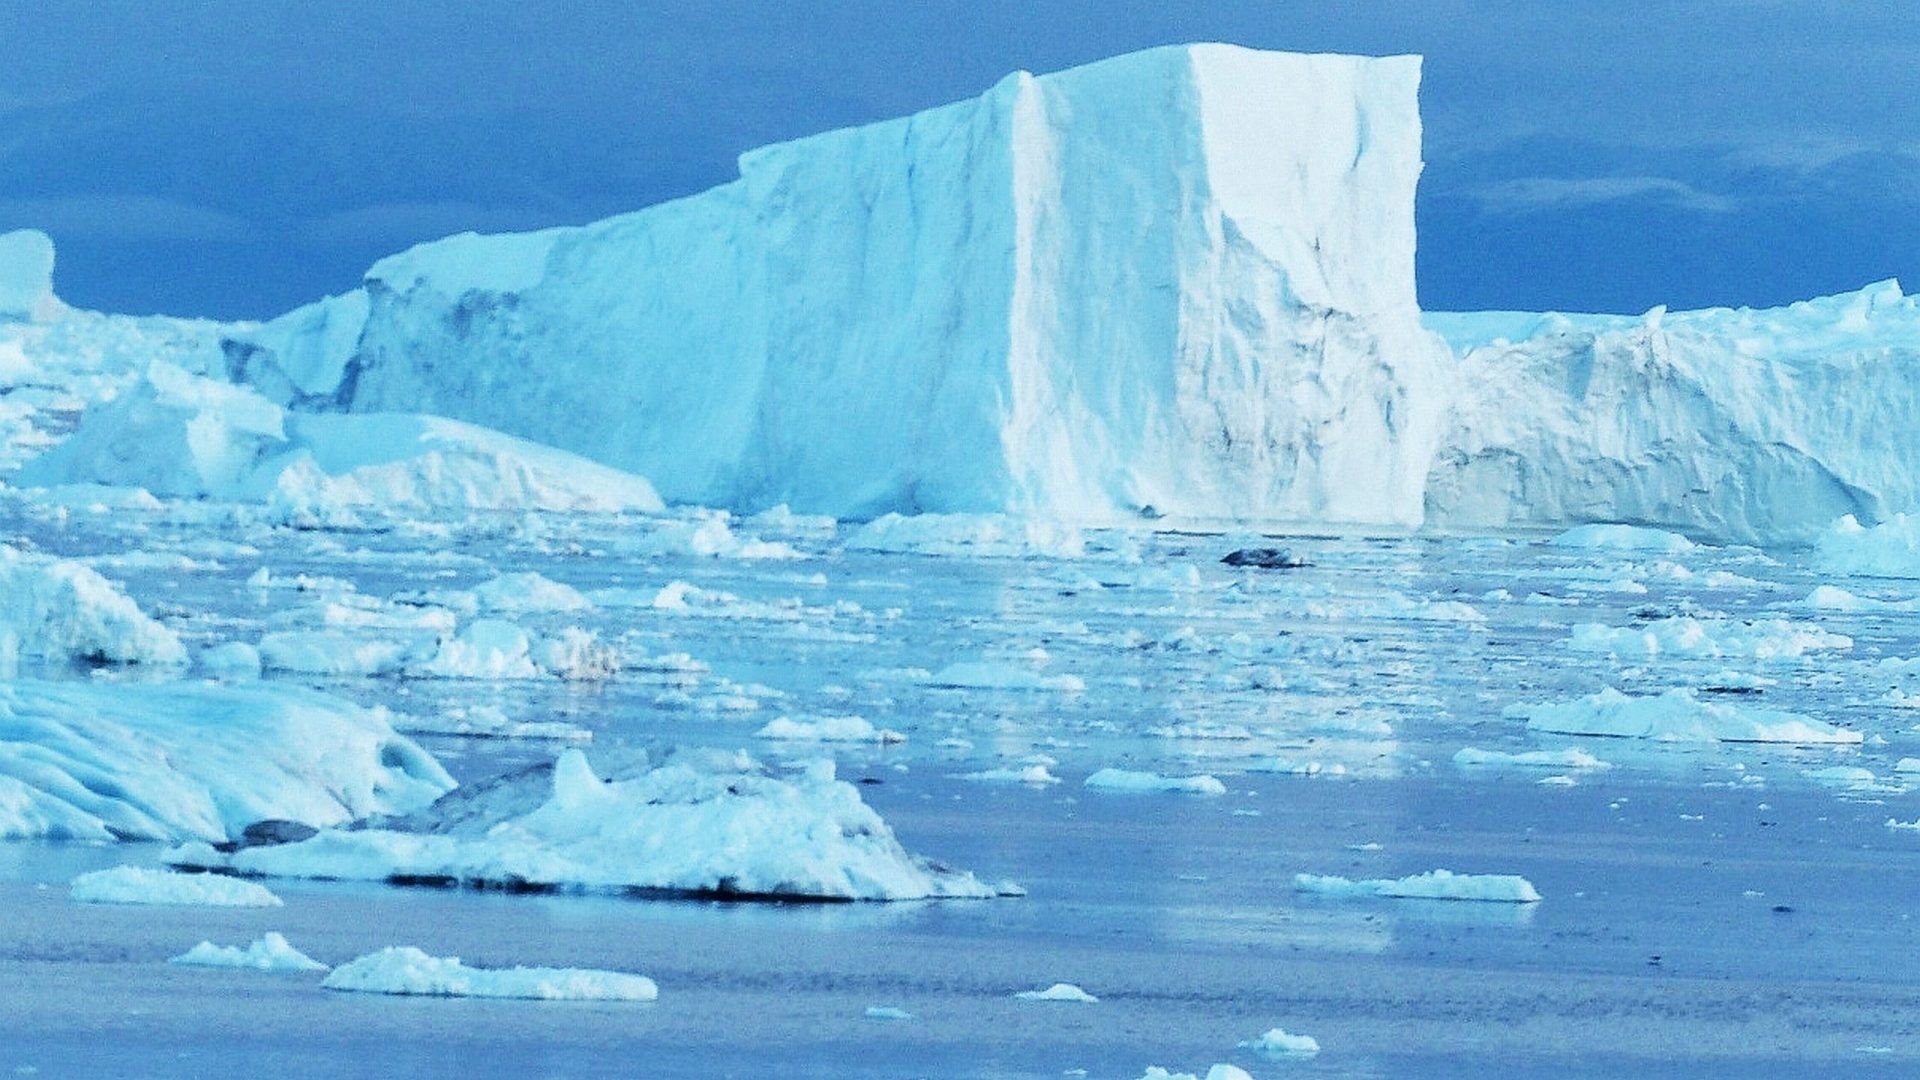 1920x1080 Growler Tag - Ocean Snow Cold Ice Iceberg Growler Greenland Nature  Wallpapers Samsung Galaxy S3 for